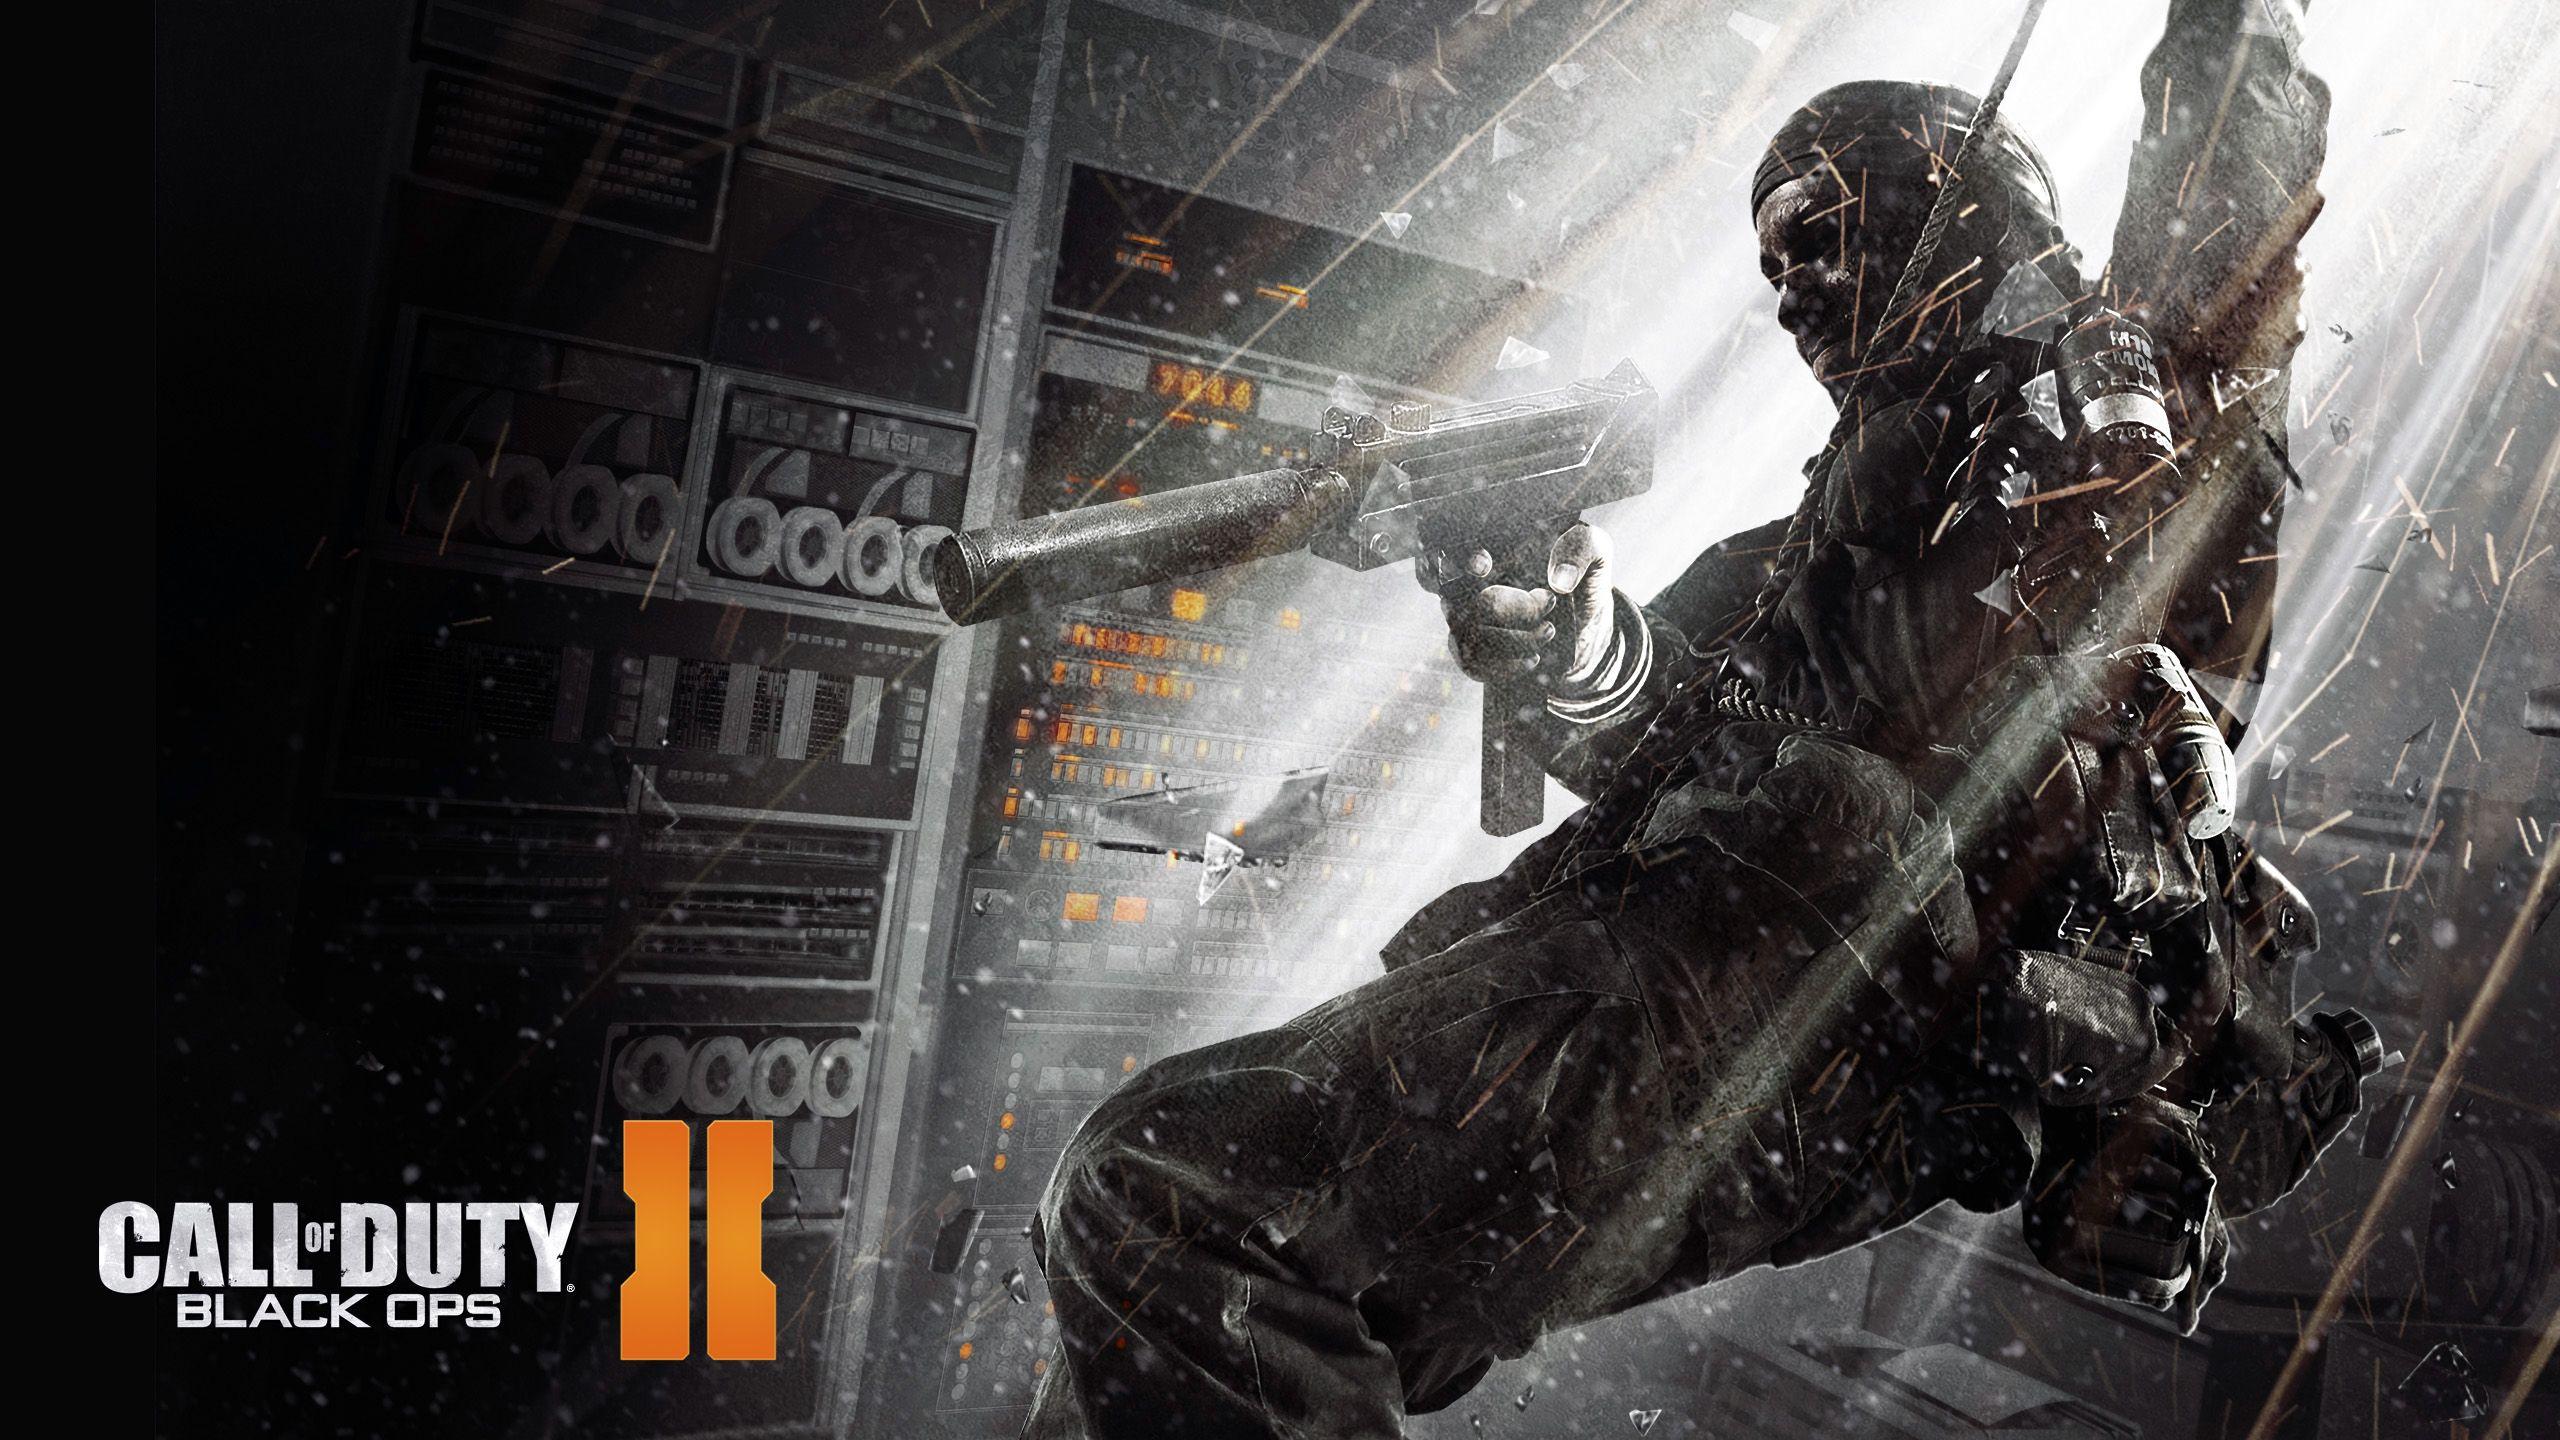 Call Of Duty: Black Ops 2 Soldier wallpaper